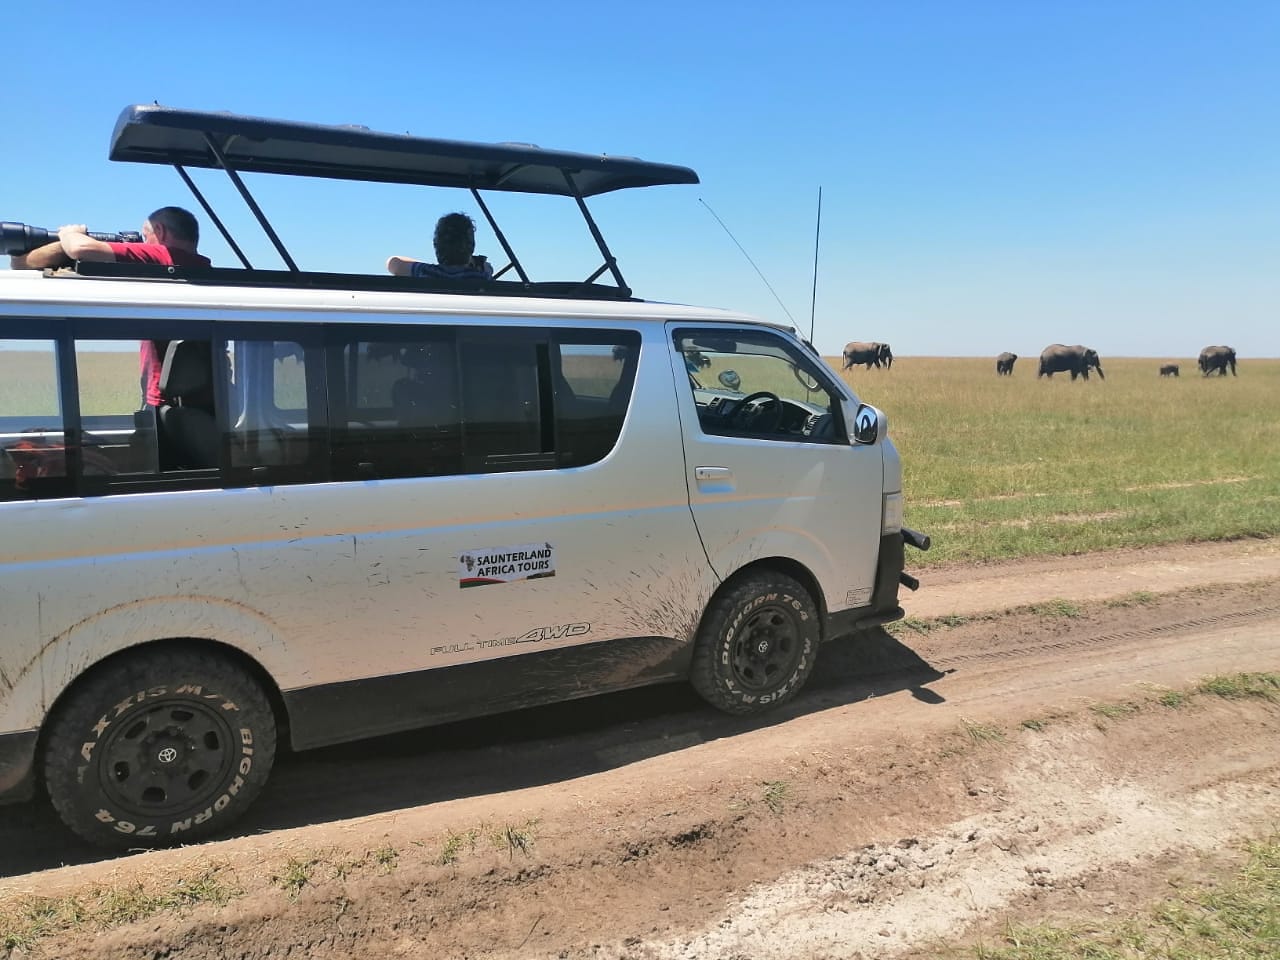 Our safari van with background of a herd of elephants in Amboseli